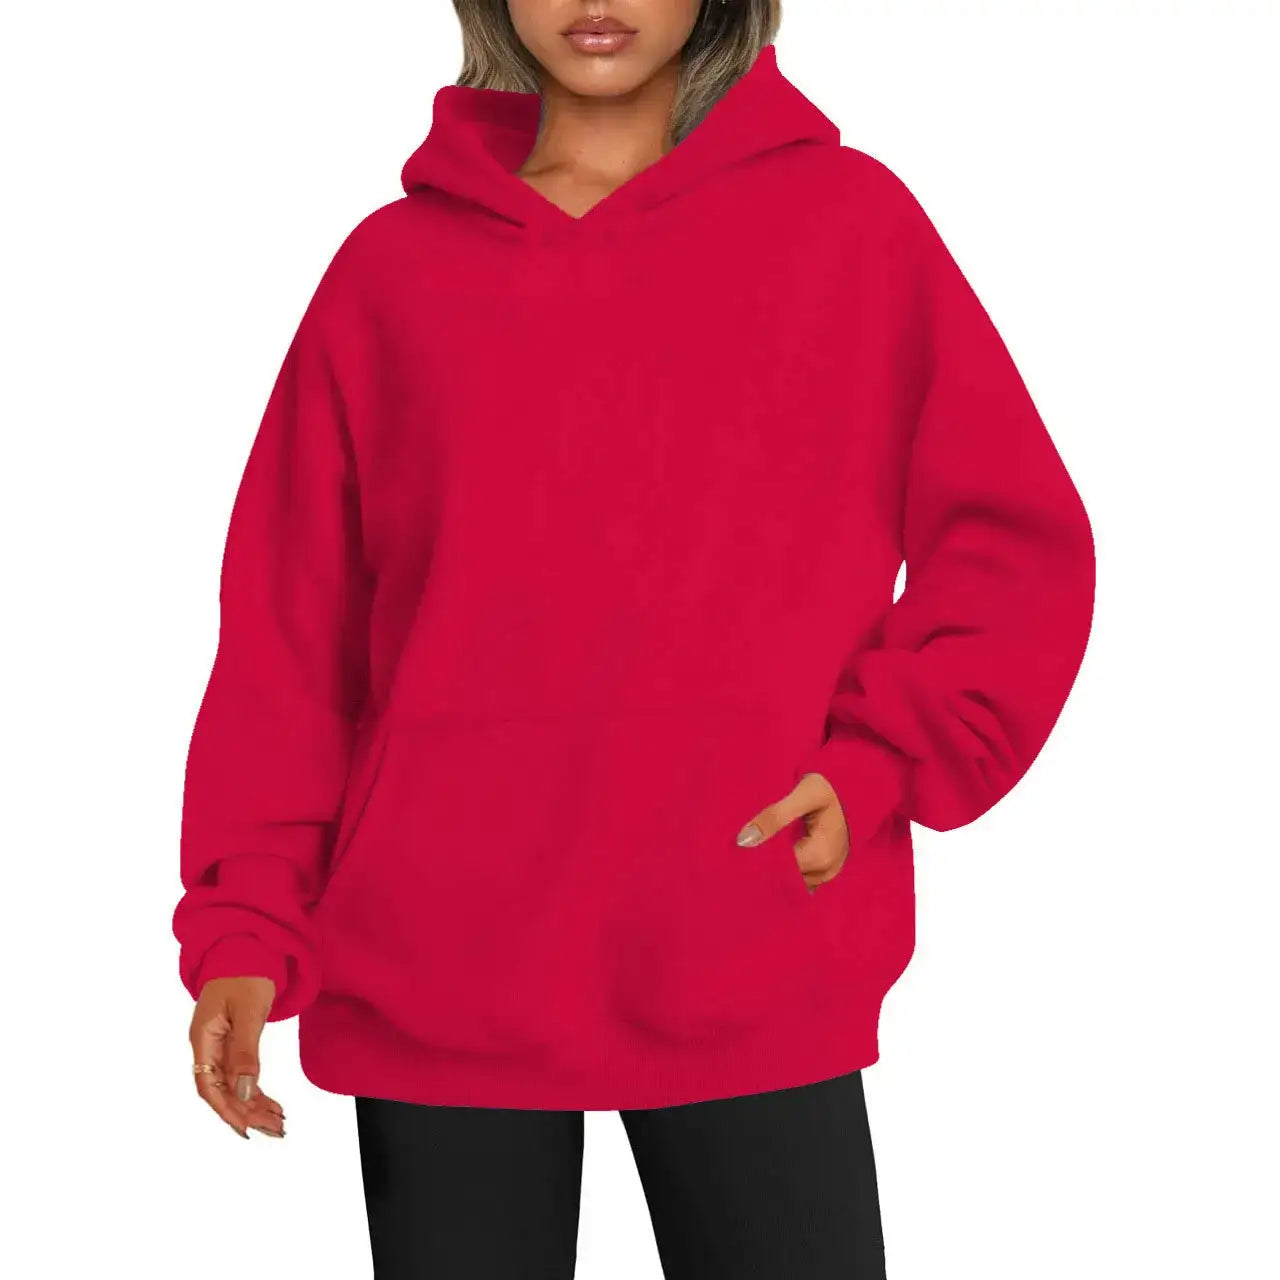 Stylish Hoodie Embrace the Latest Trends